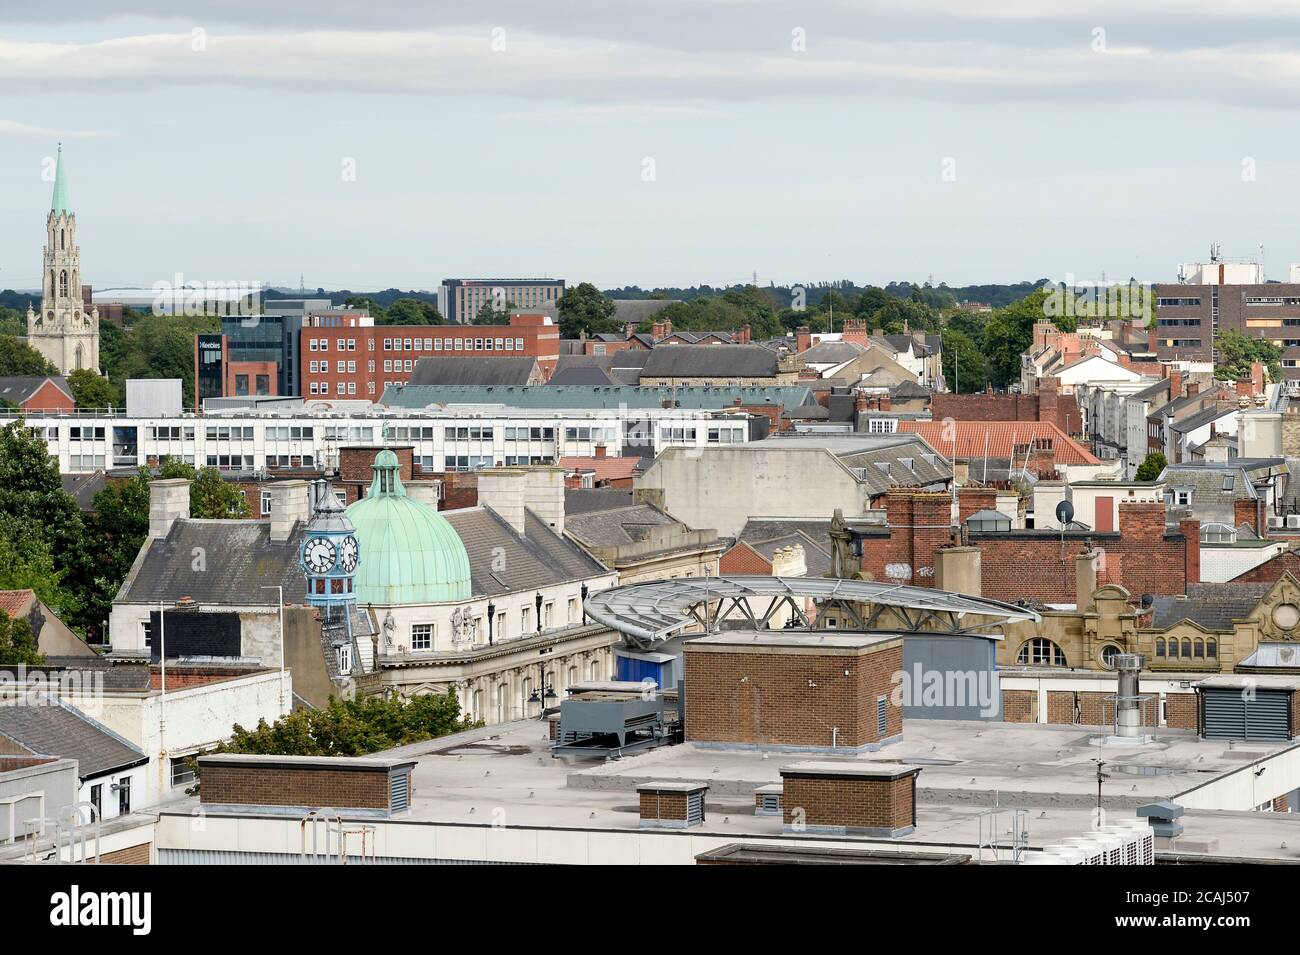 Views across Doncaster from above Stock Photo